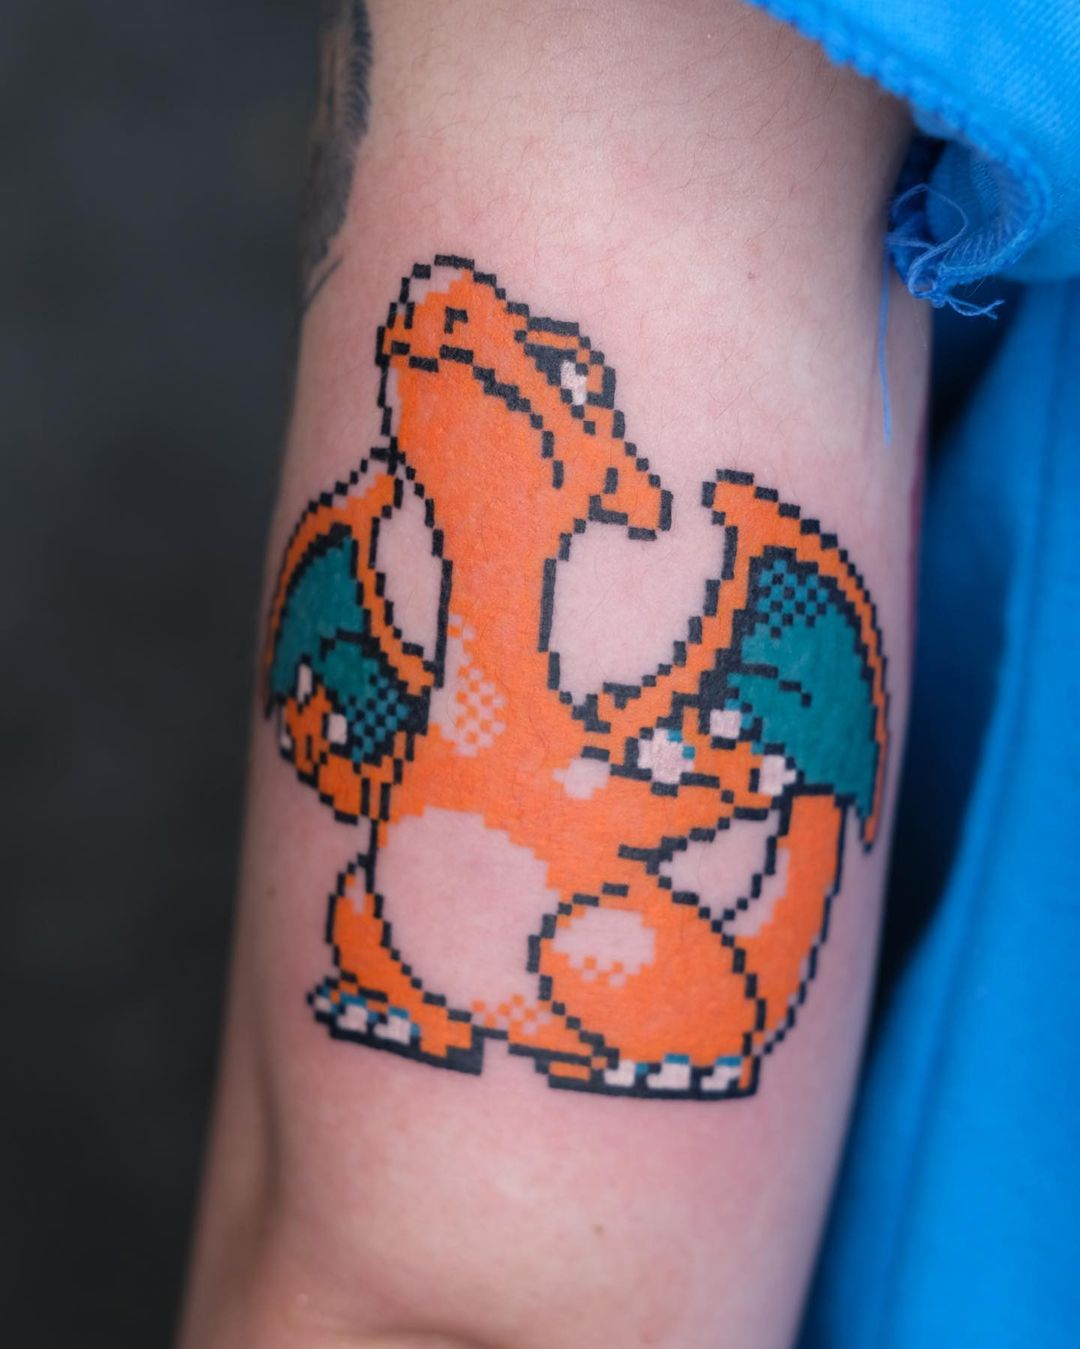 Bloody Ink Tattoo - Pixel love design Artist : （慈）Aric tattoo For tattoo  inquiry or consultation,please do not hesitate to message or email us Email  : bloodyinktattoo@gmail.com Whatsapp : +601133988903 | Facebook